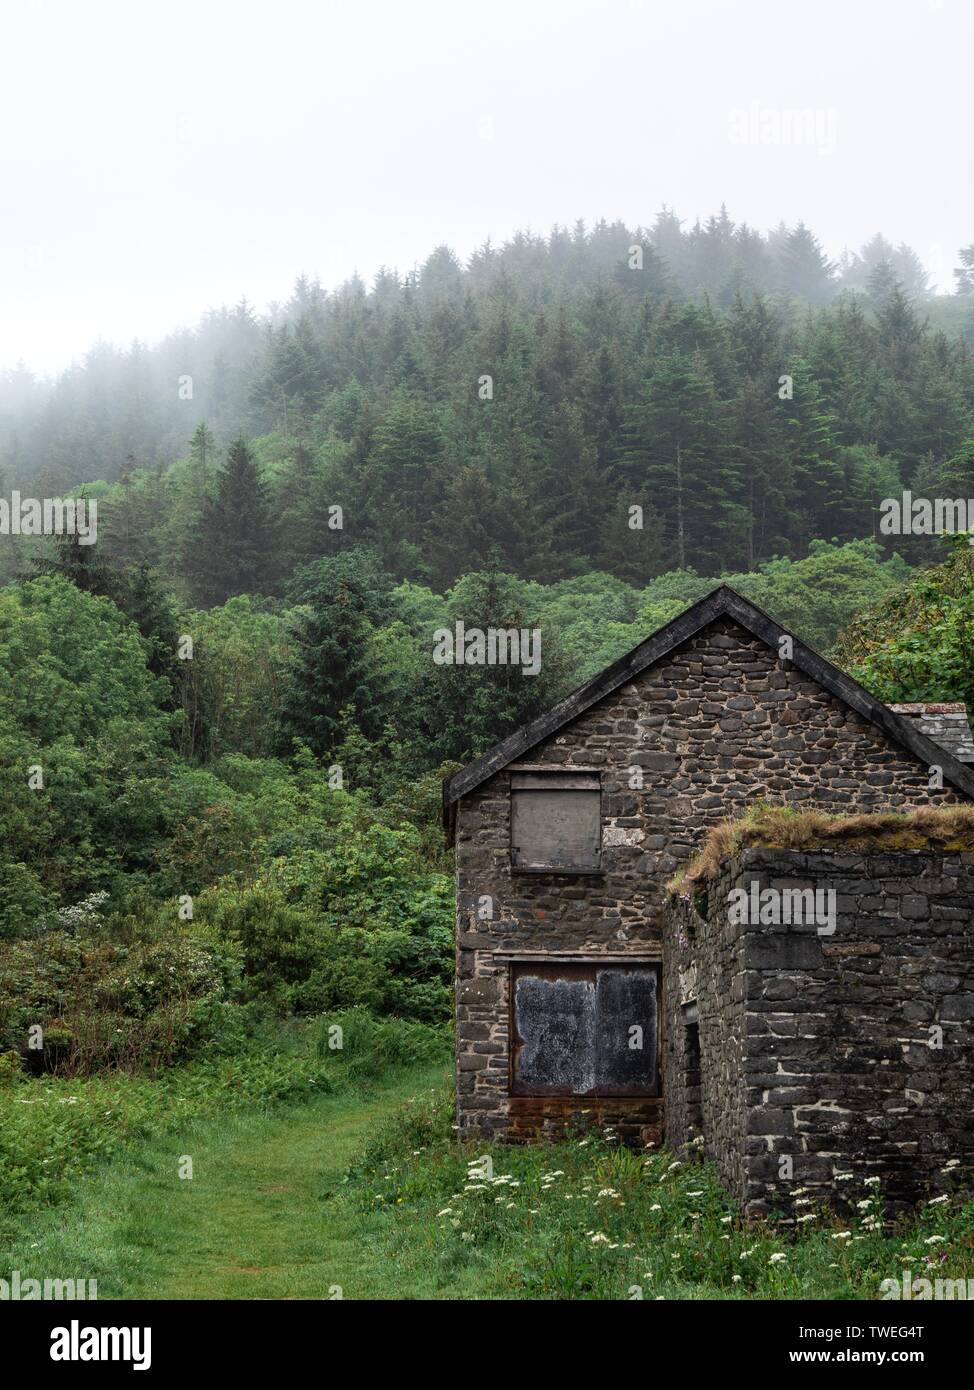 An abandoned old stone cabin in the woods on a misty day Stock Photo